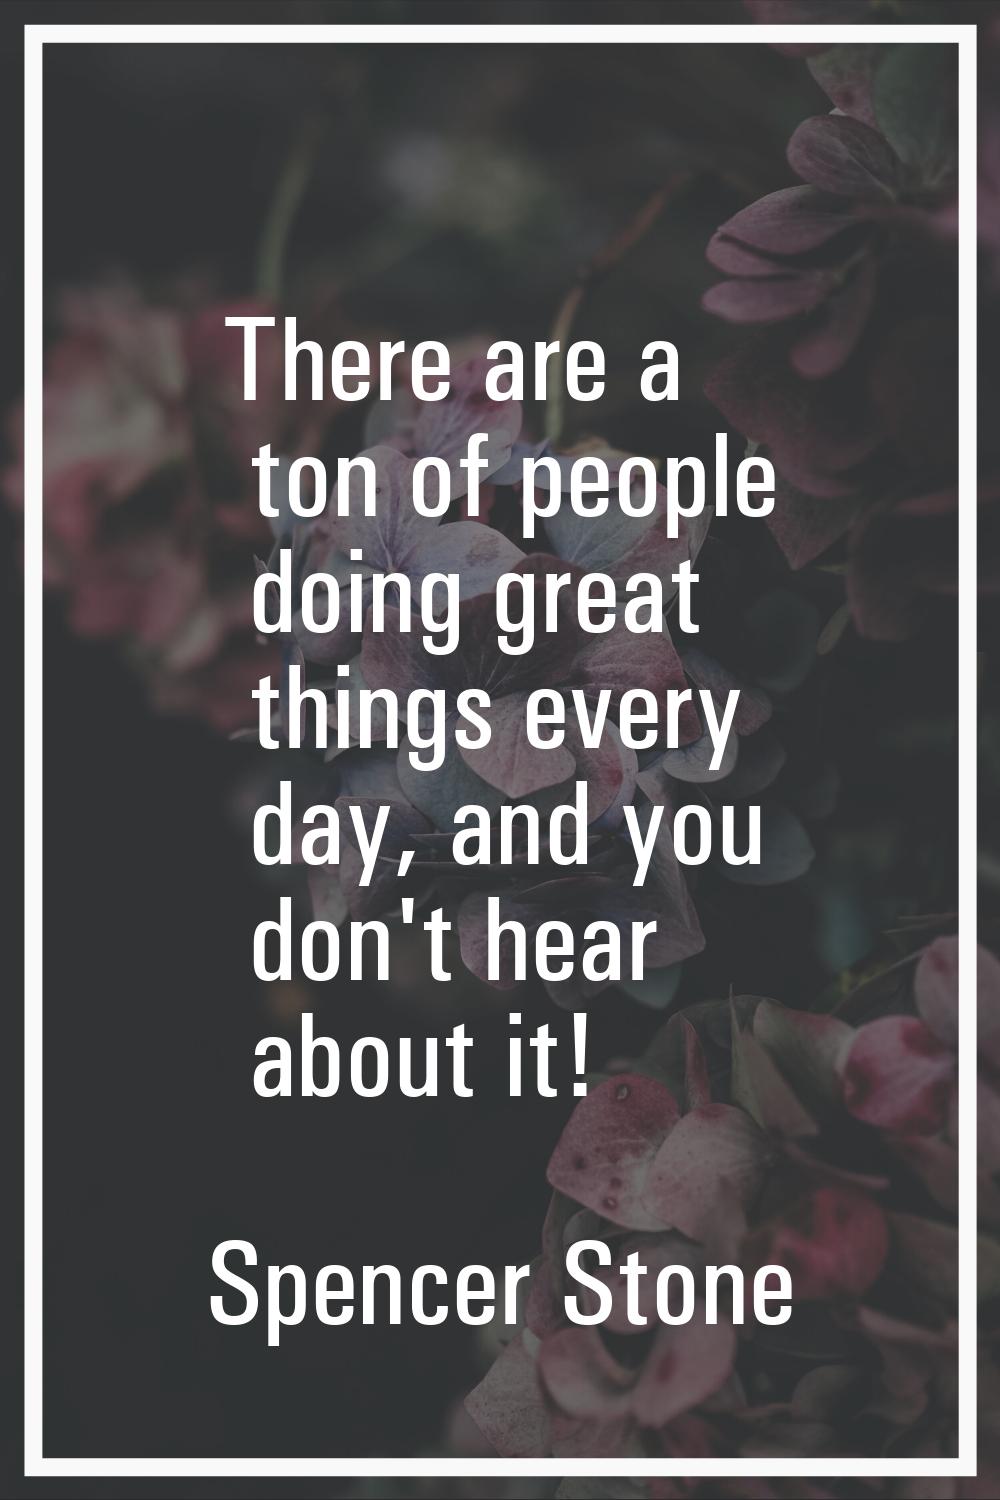 There are a ton of people doing great things every day, and you don't hear about it!